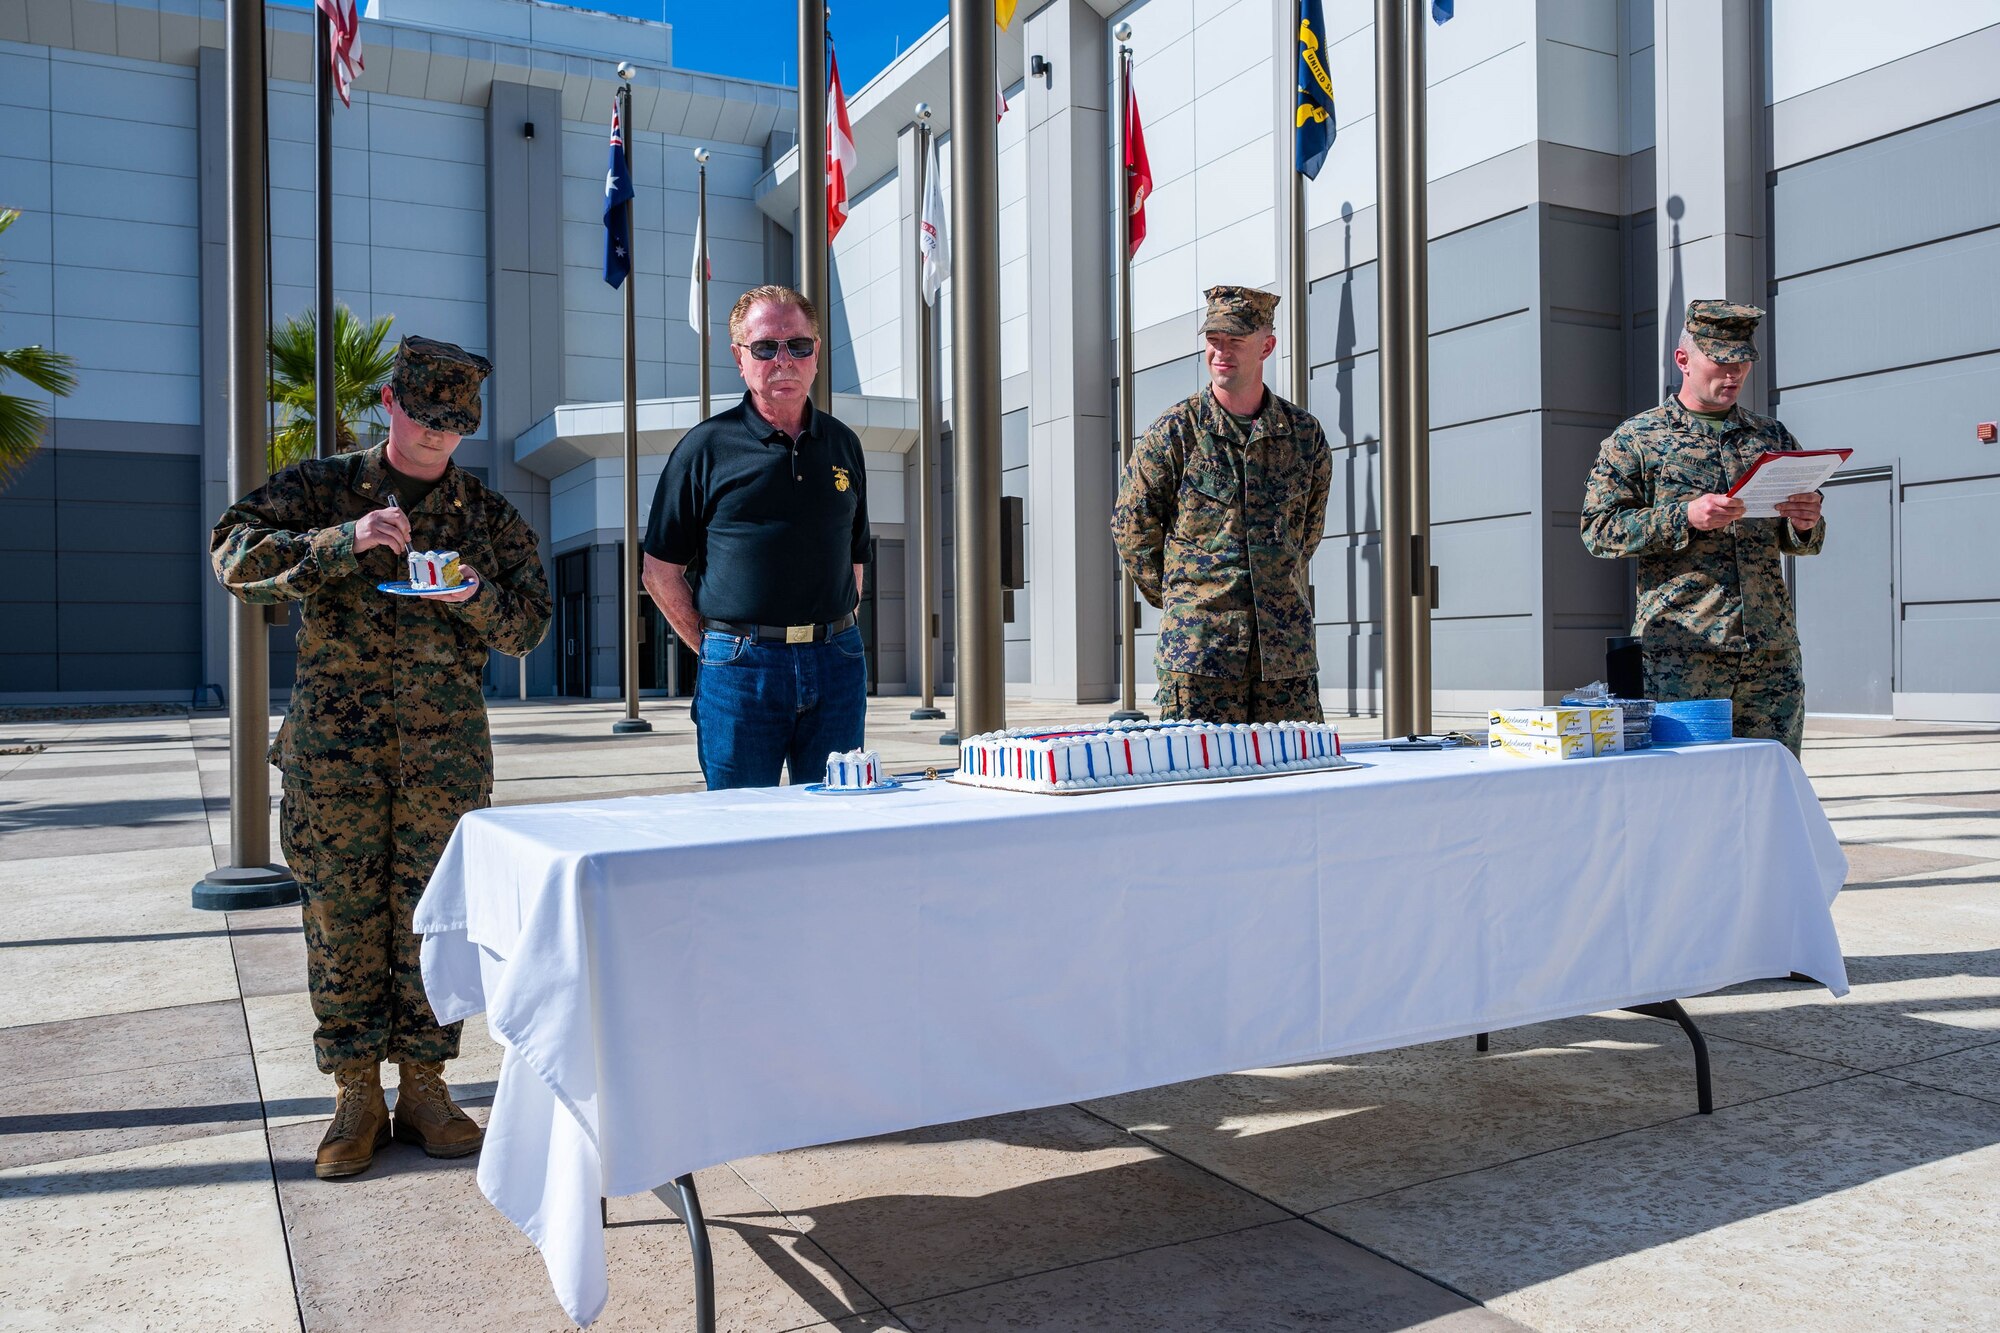 U.S. Marines and other members of the Combined Force Space Component Command celebrate the 248th birthday of the U.S. Marine Corps at the CFSCC Headquarters on Vandenberg Space Force Base, Calif., Nov. 9, 2023. CFSCC celebrated the birthday with reading of the Commandant's Birthday Message and a cake-cutting ceremony with the traditional passing from the oldest to youngest Marine present. (U.S. Space Force photo by Tech. Sgt. Luke Kitterman)